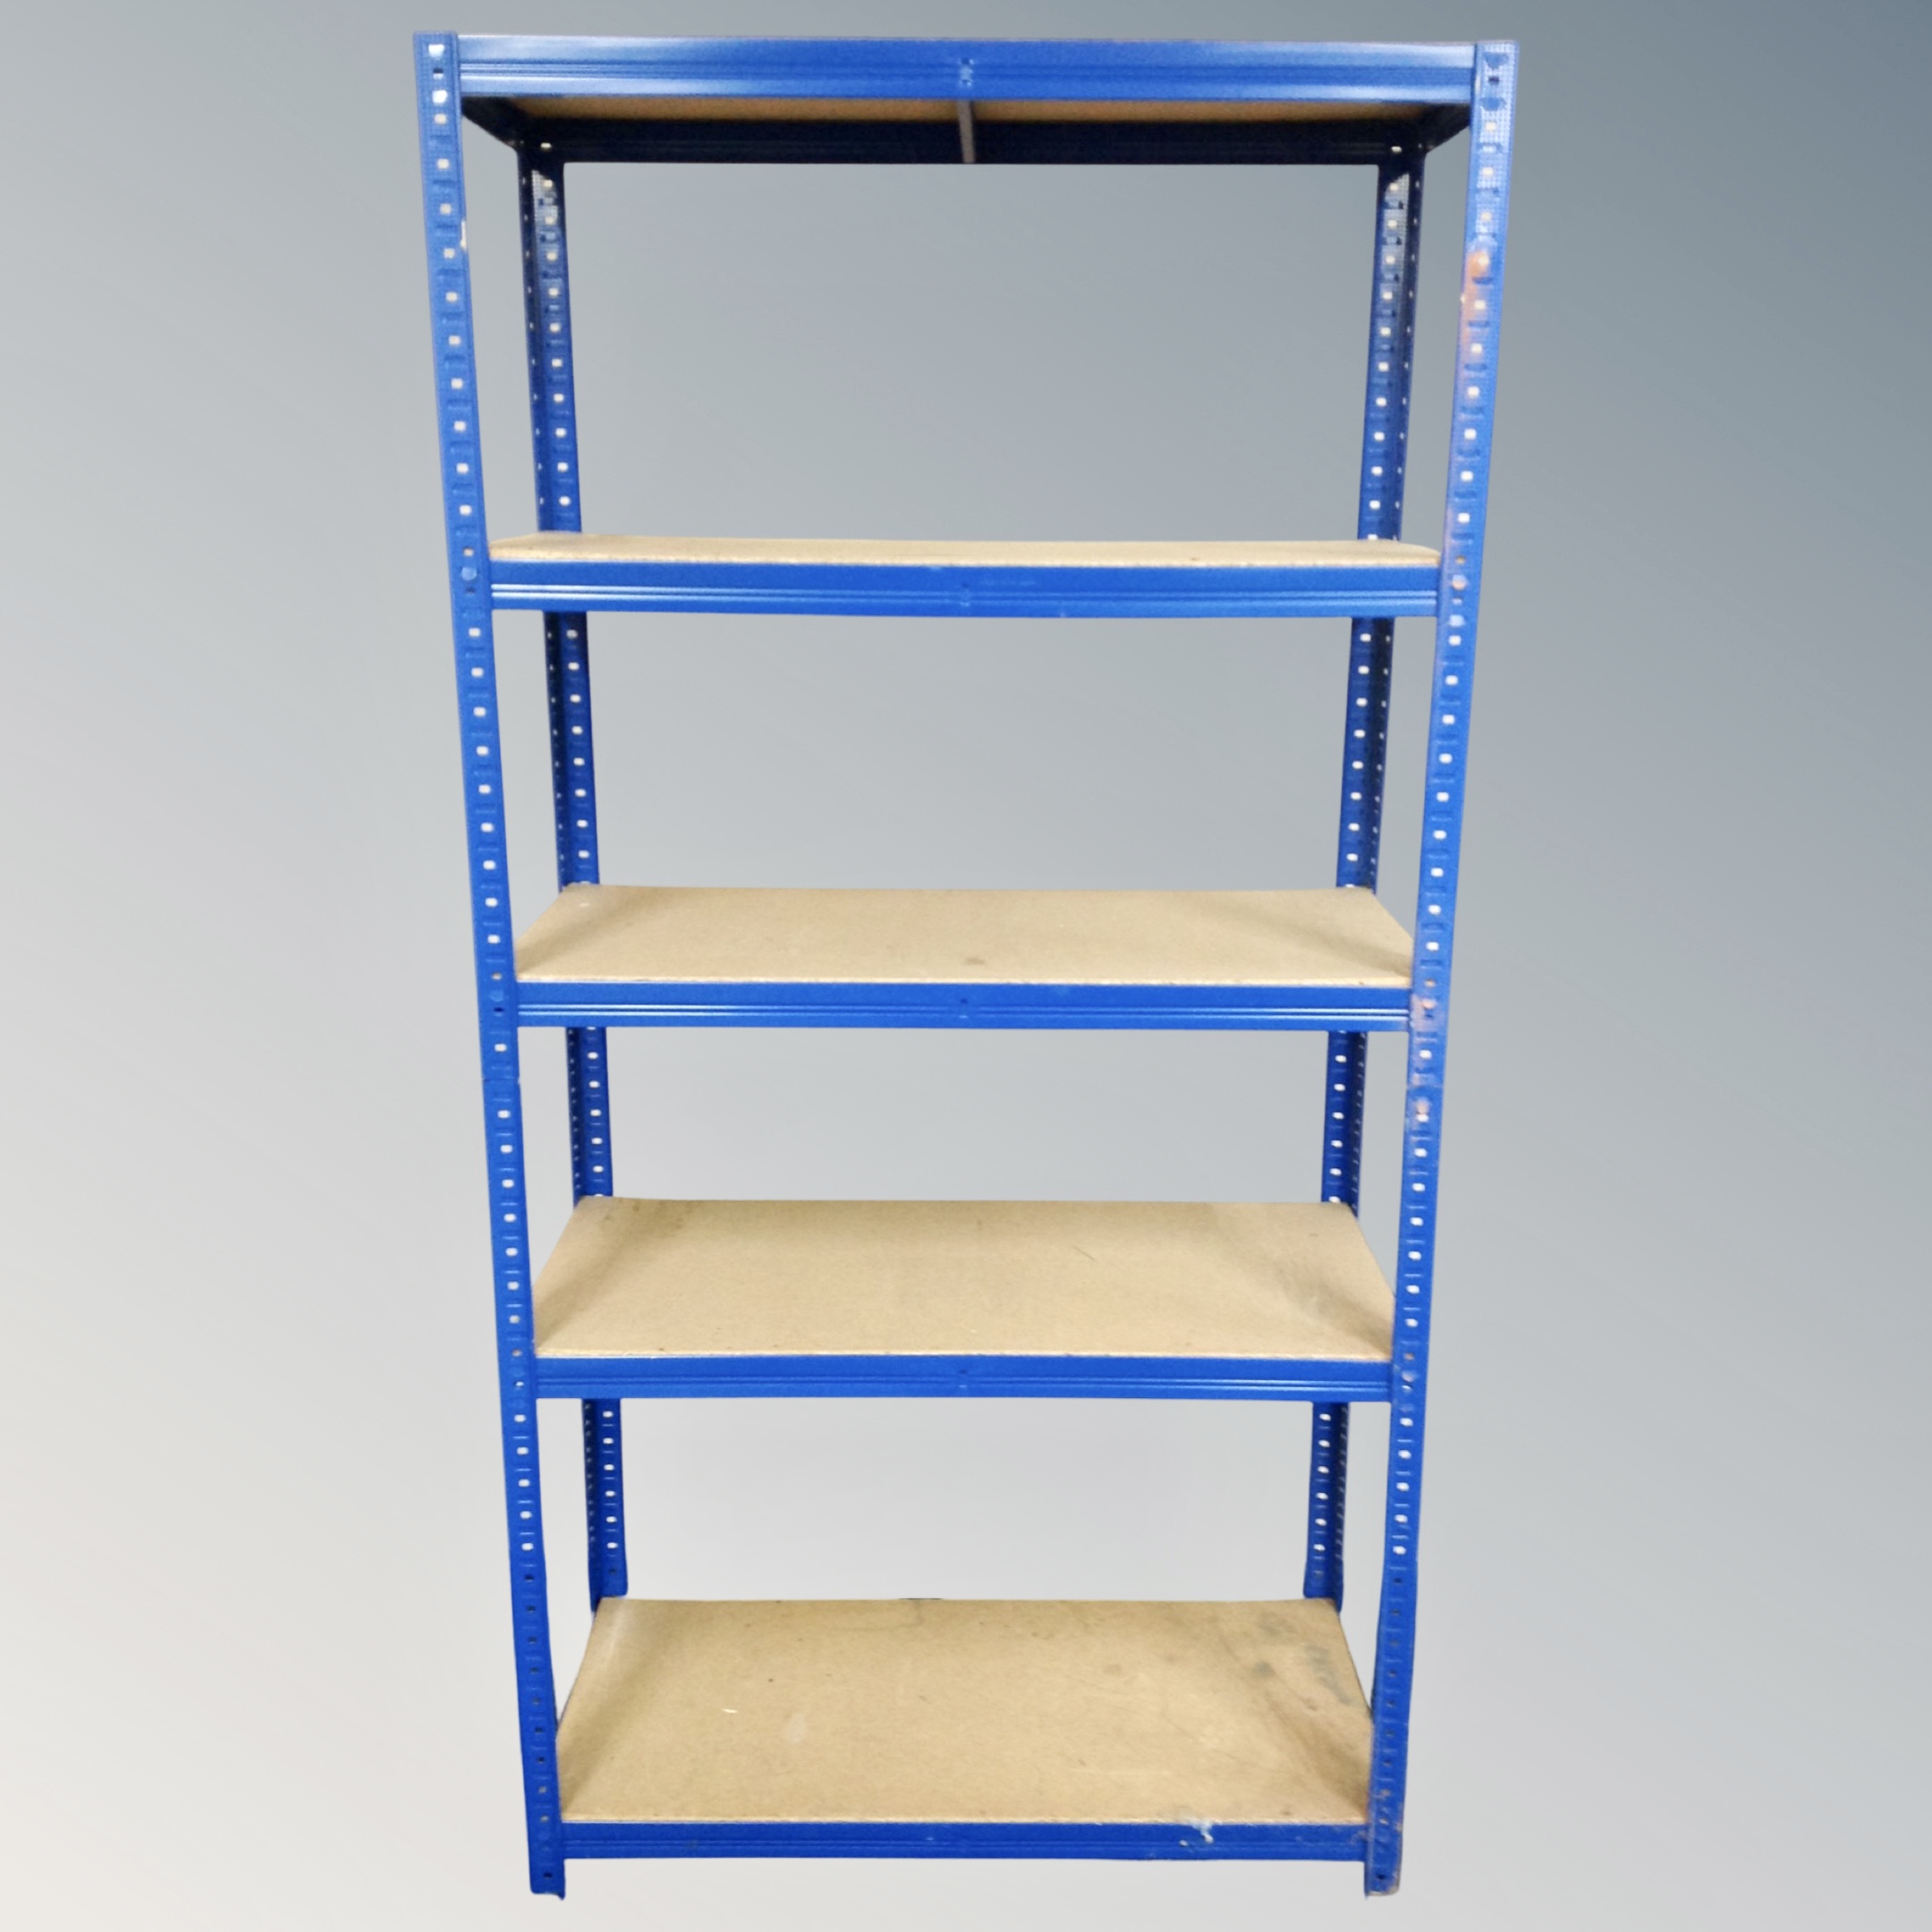 Two sets of five tier metal metal shelving each approximately 90 cm wide,